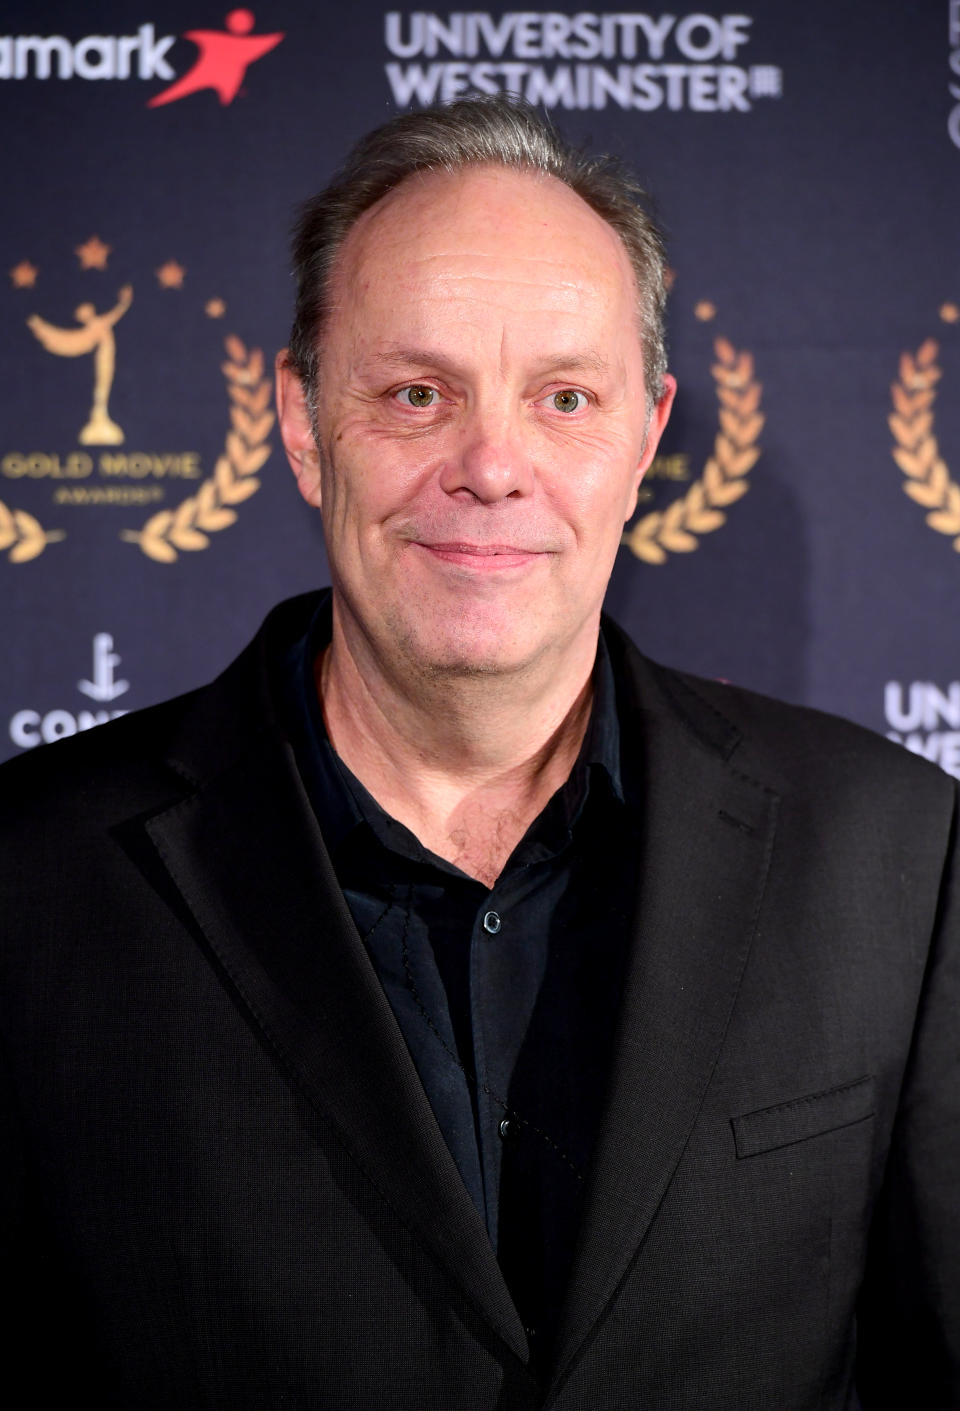 David Schaal attending the Gold Movie Awards 2020, held at Regent Street Cinema in Marylebone, London. (Photo by Ian West/PA Images via Getty Images)